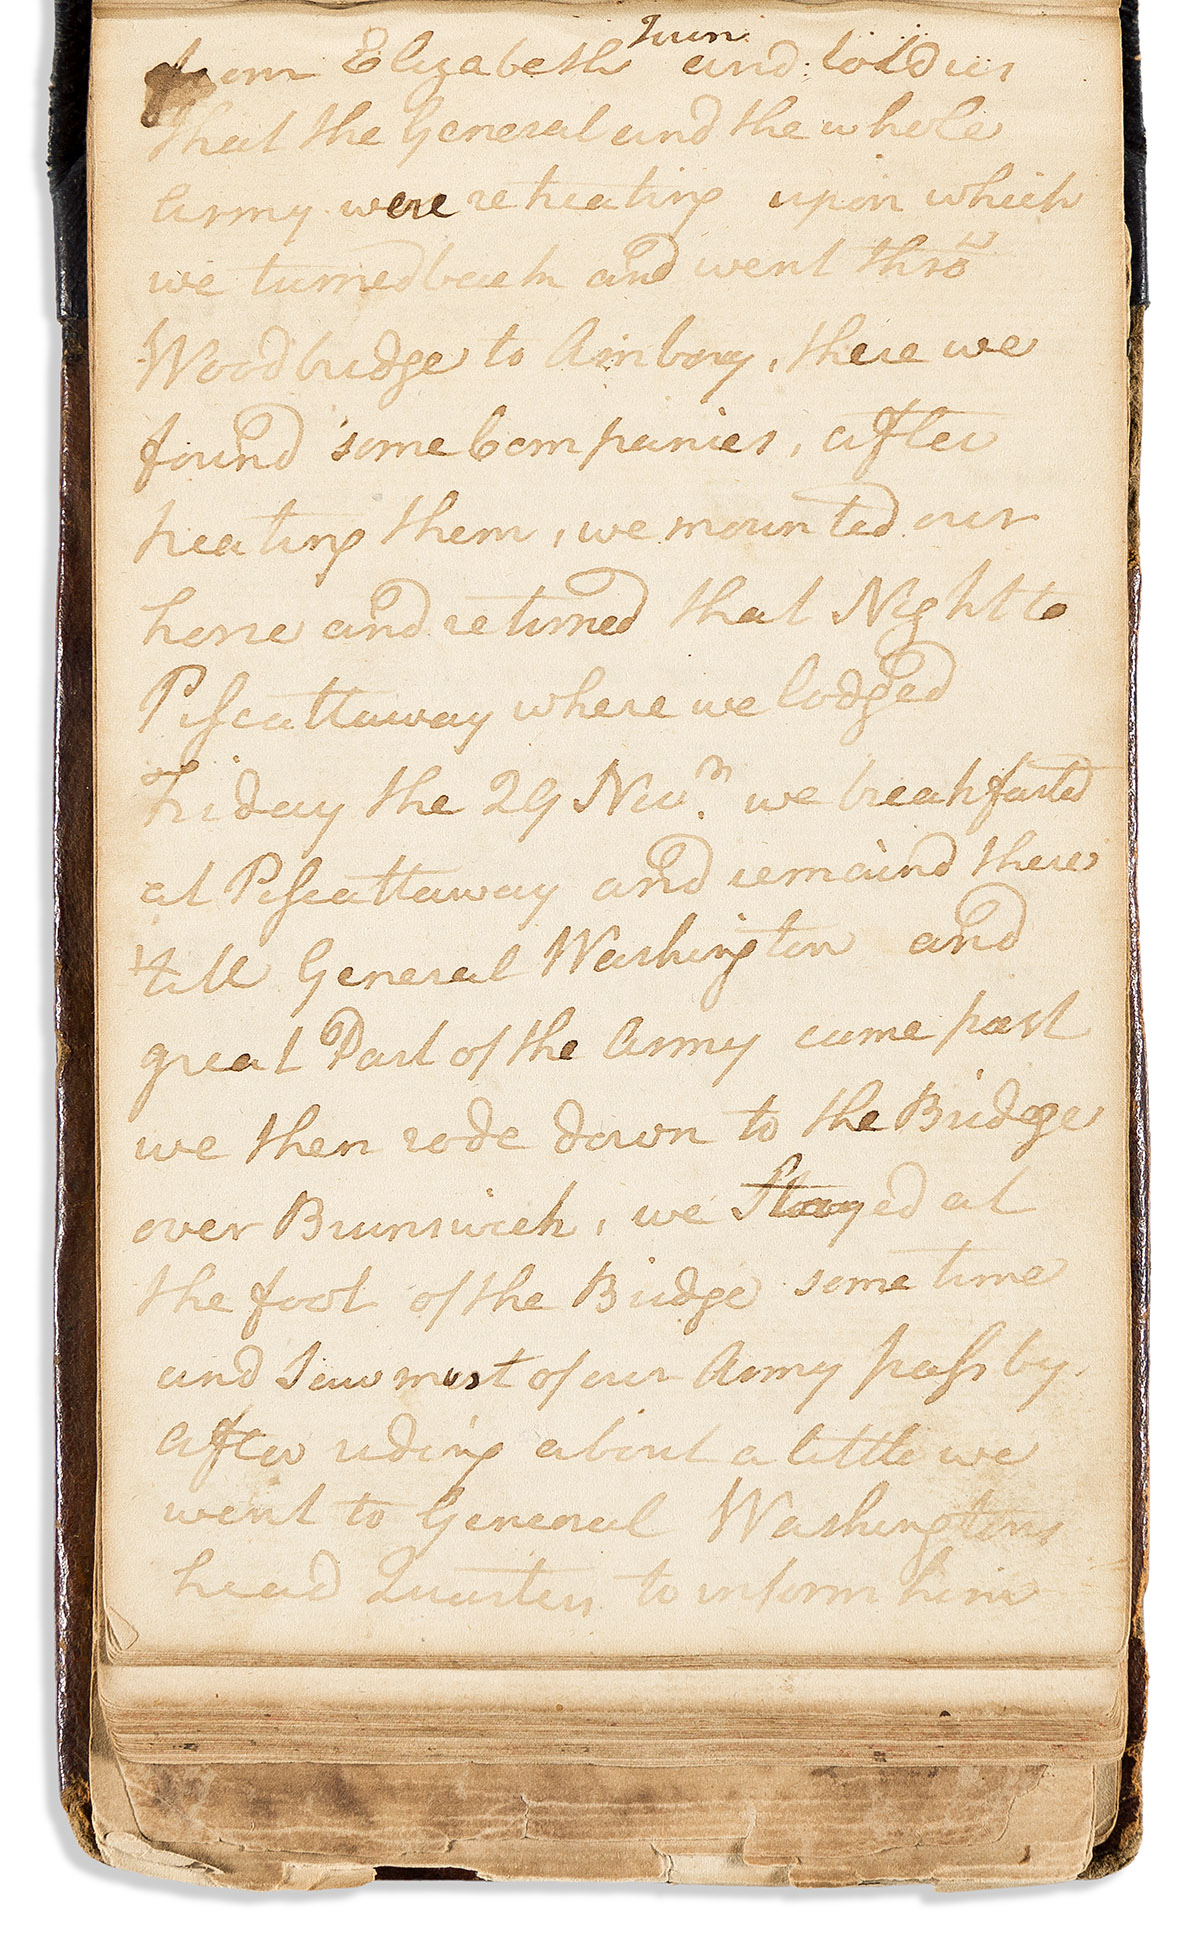 (AMERICAN REVOLUTION--1776.) Thomas Contee. Diary of meetings with Washington and Hancock in the midst of the retreat from New York.